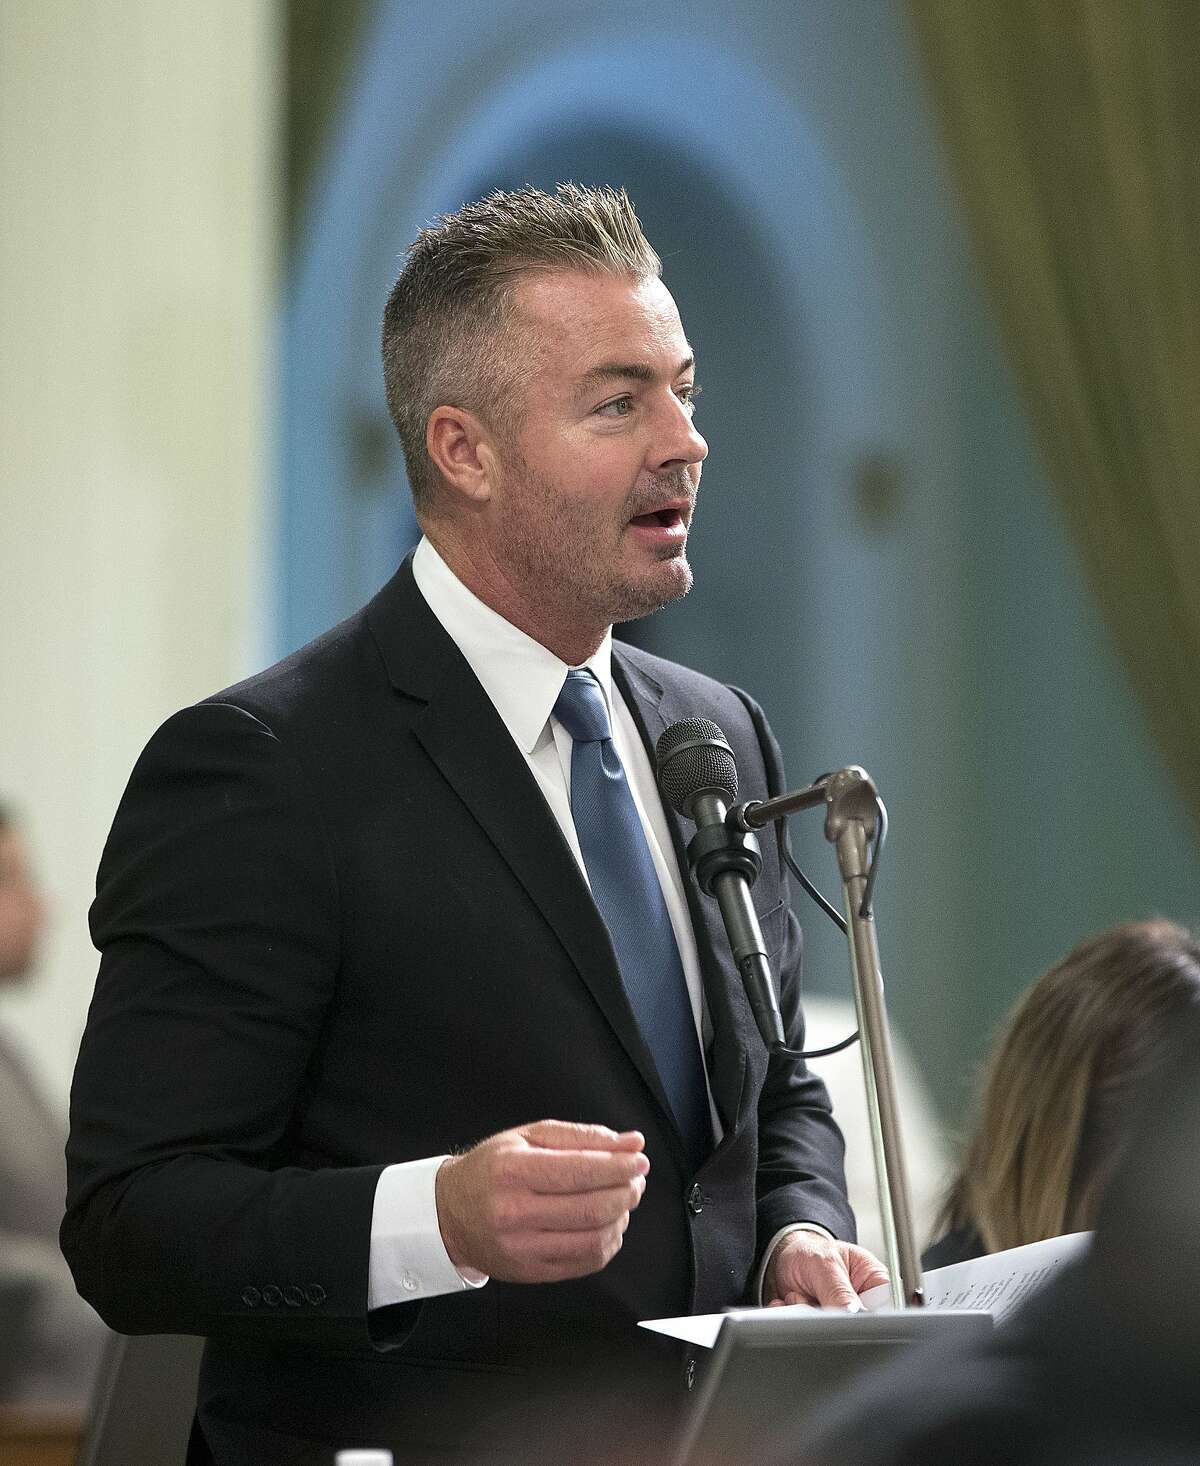 FILE - In this Aug. 18, 2016 file photo, California Assemblyman Travis Allen, R-Huntington Beach, addresses the Assembly in Sacramento, Calif. Allen said Thursday, June 22, 2017, he's entering the 2018 California gubernatorial that has largely been dominated by Democrats. (AP Photo/Rich Pedroncelli, file)